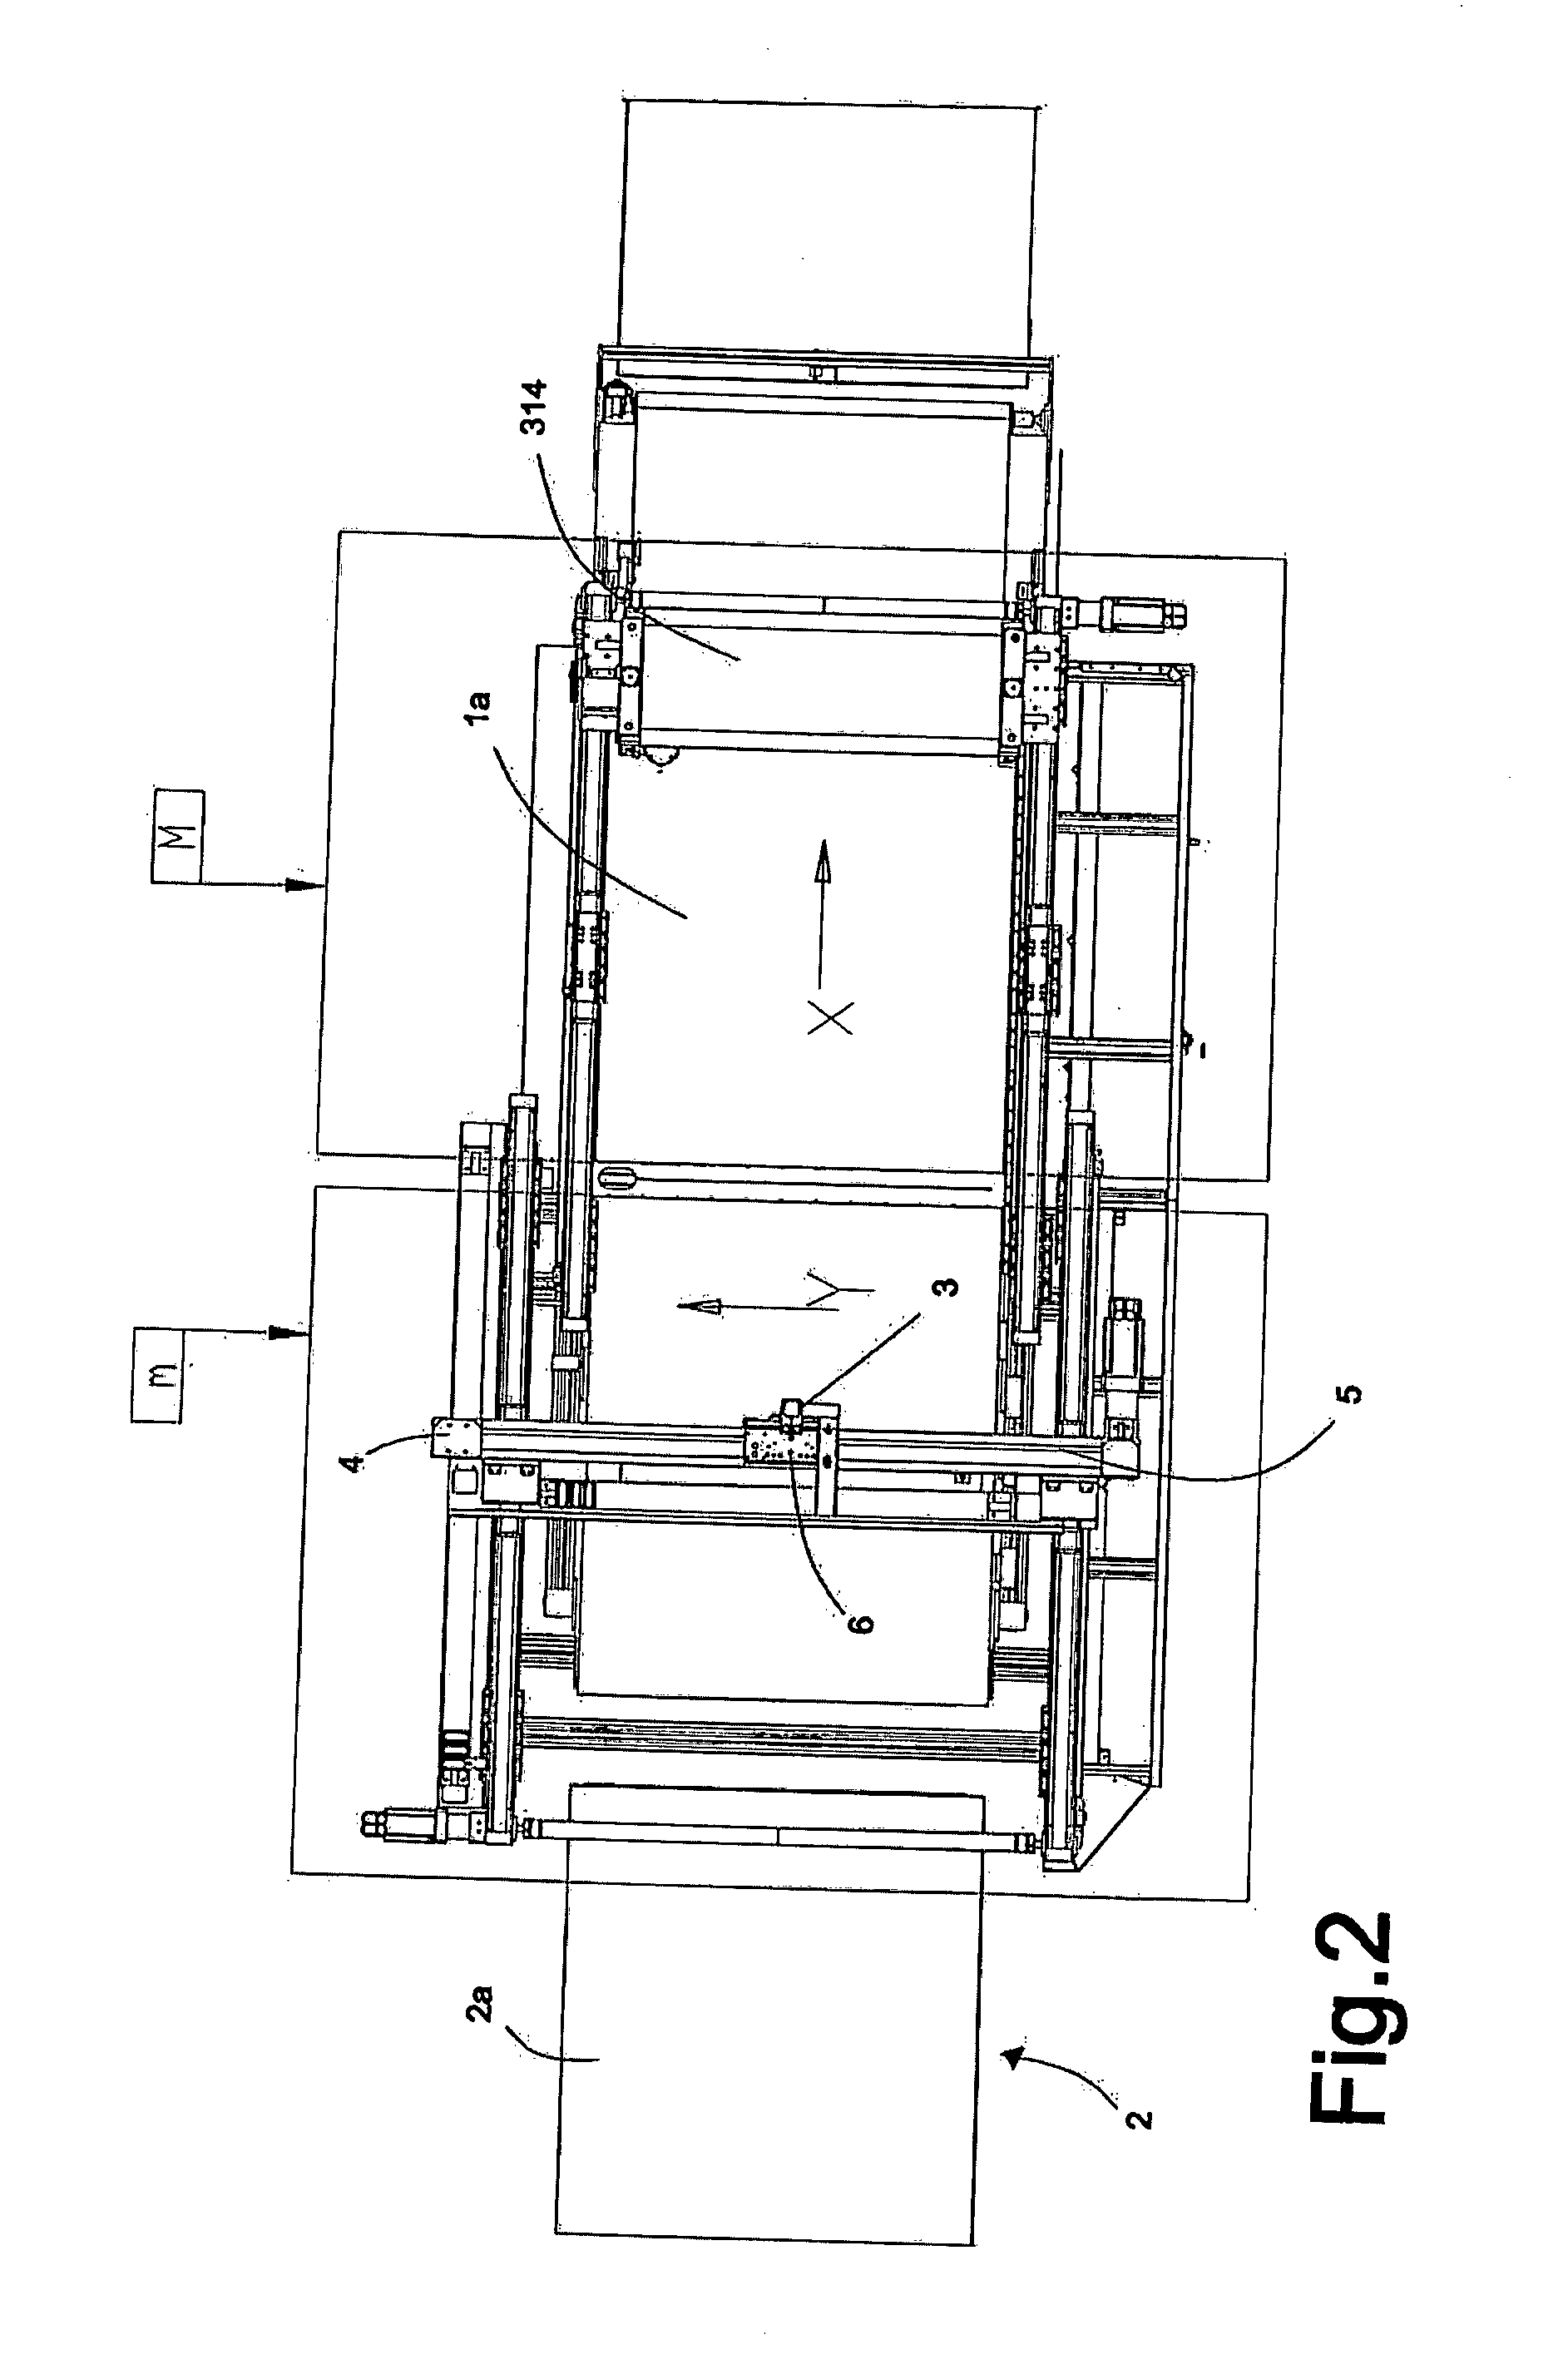 Apparatus and method for weeding a multilayer sheet comprising a support liner and at least one adhesive film coupled with the liner